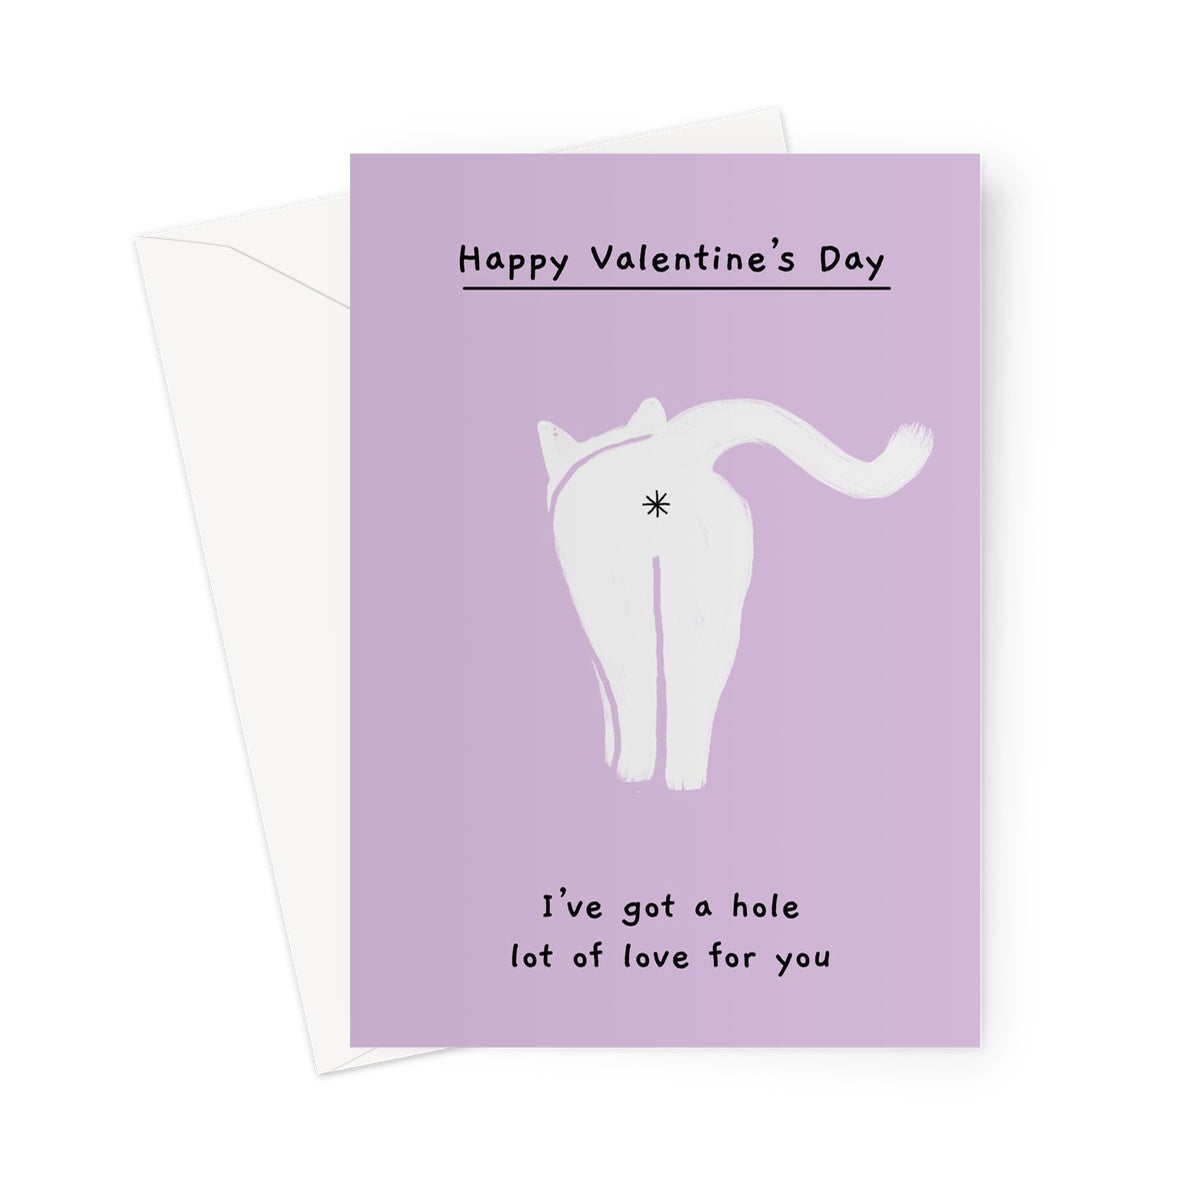 Hole Lot of Love - Valentine's Day Card